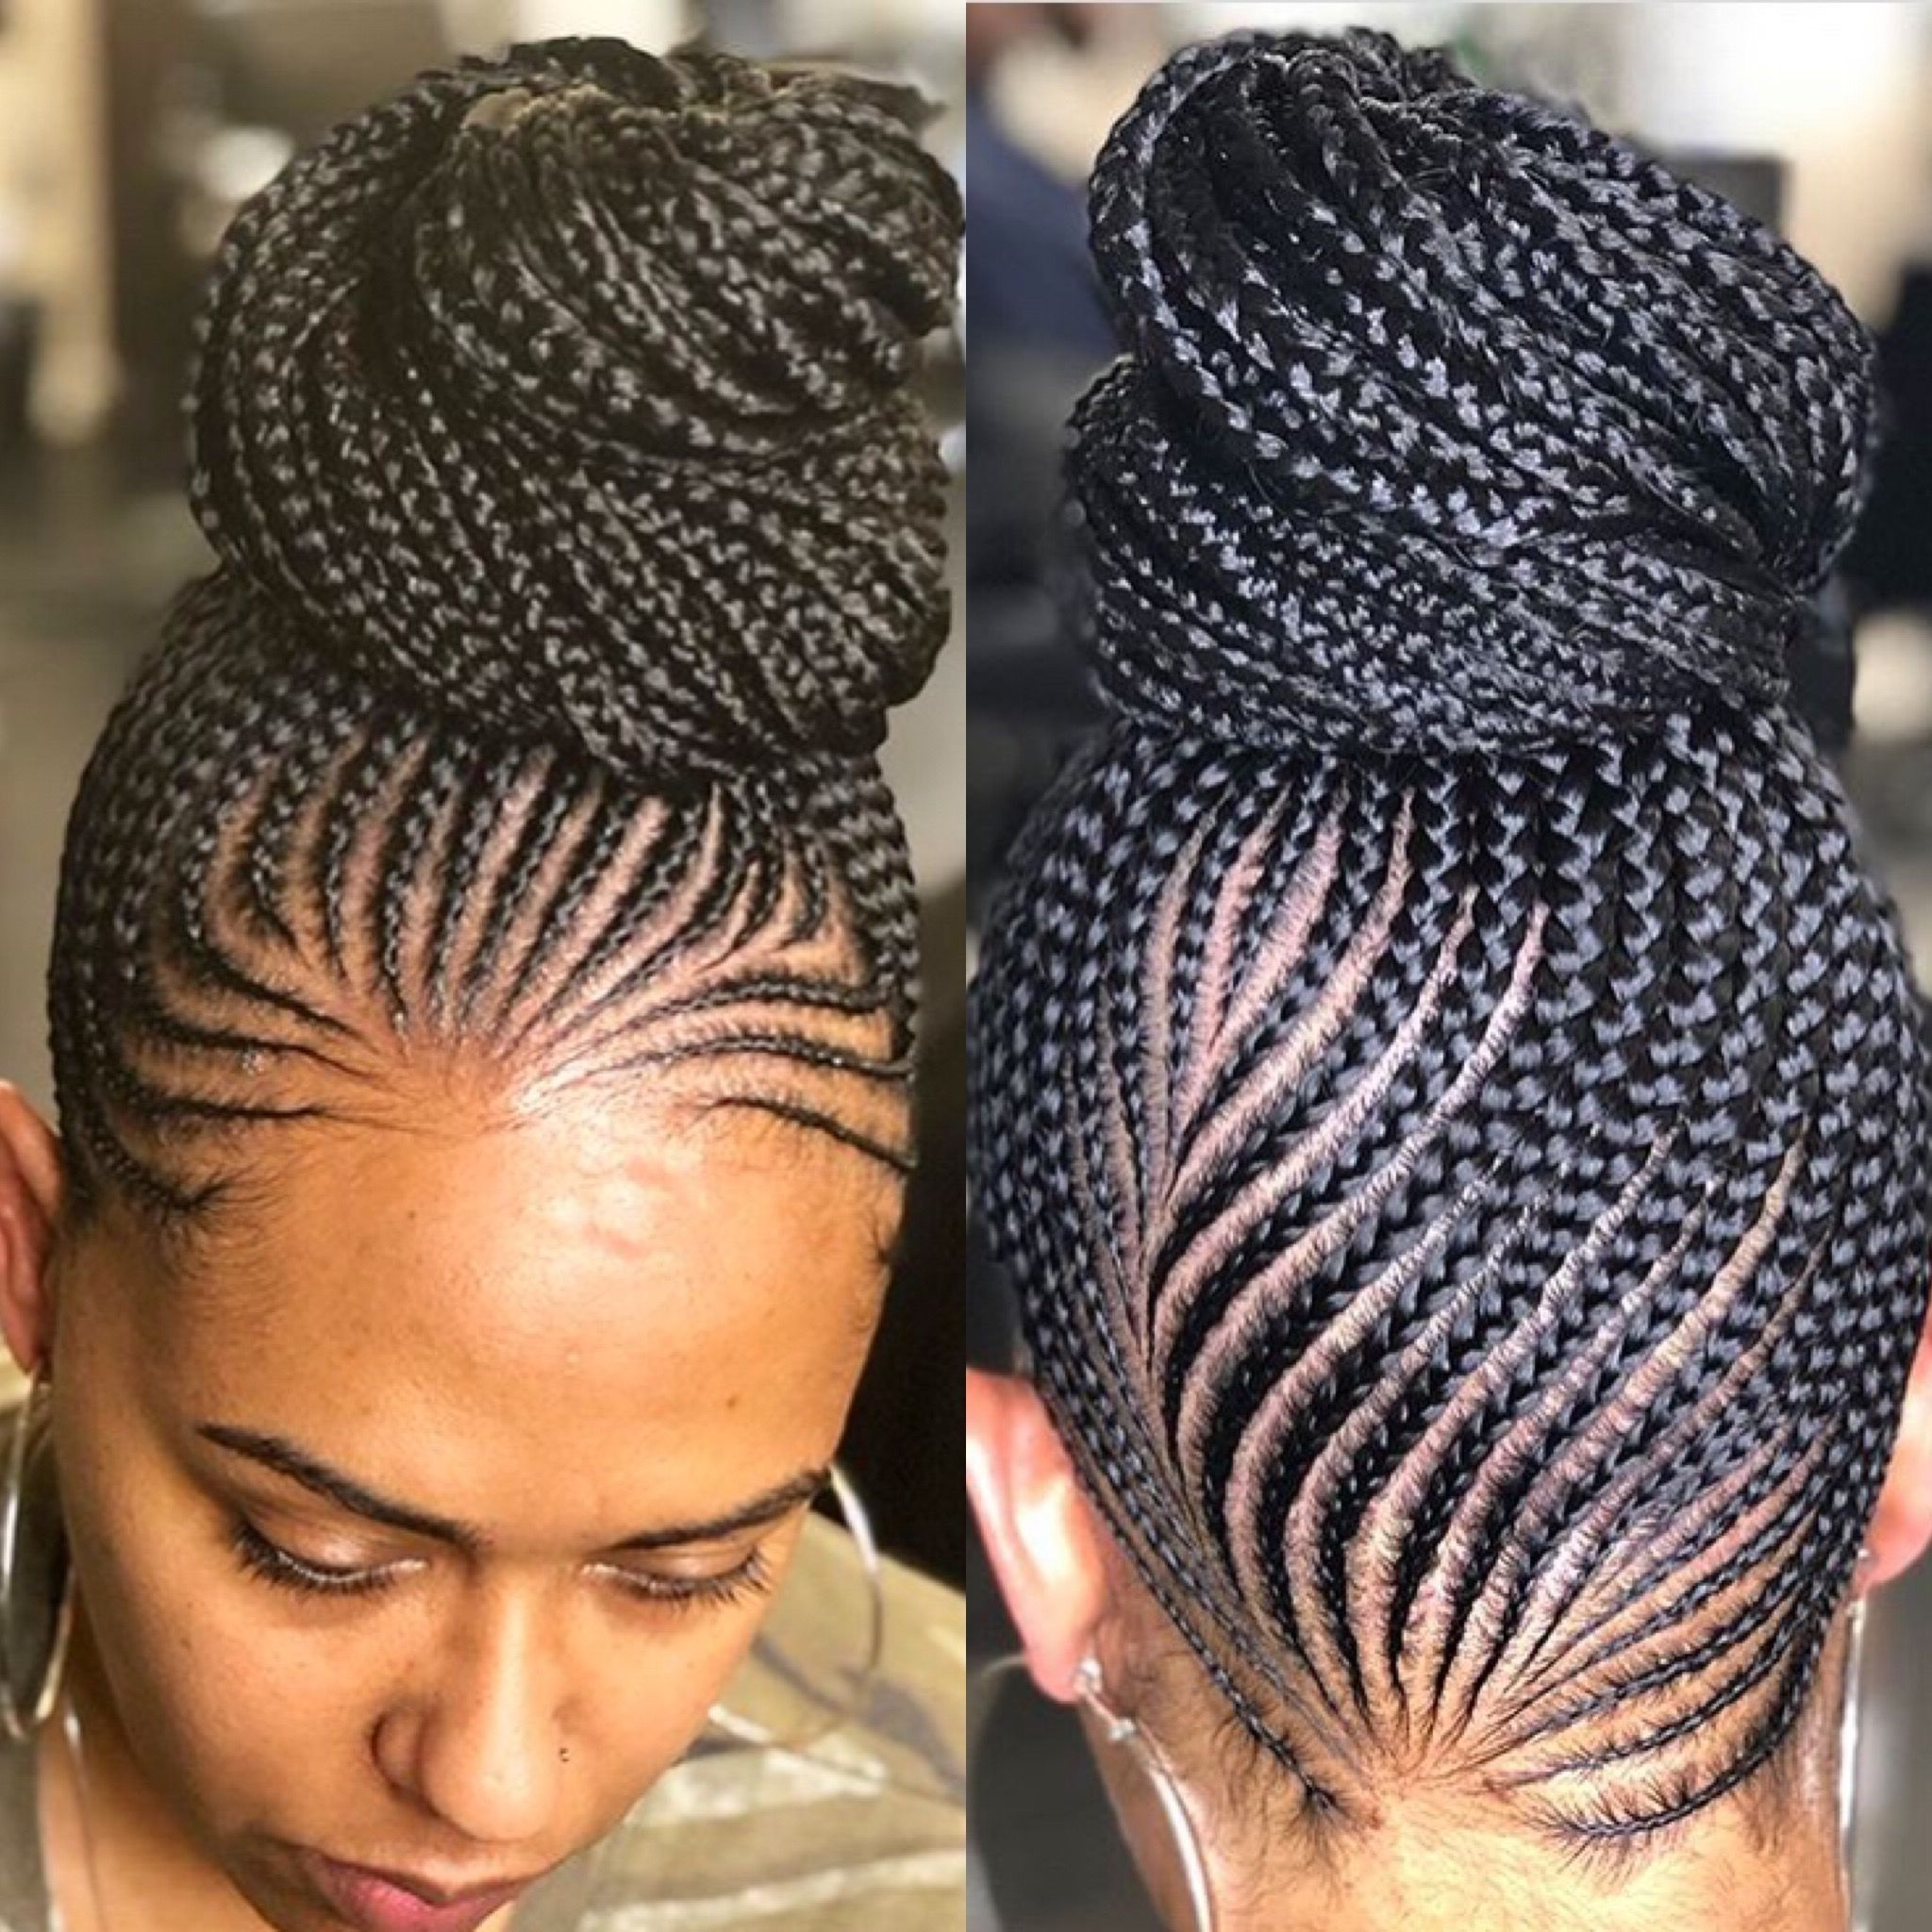 2019 Cornrow Braids Hairstyles With Ponytail With Pinterest/ Naischea (View 10 of 20)